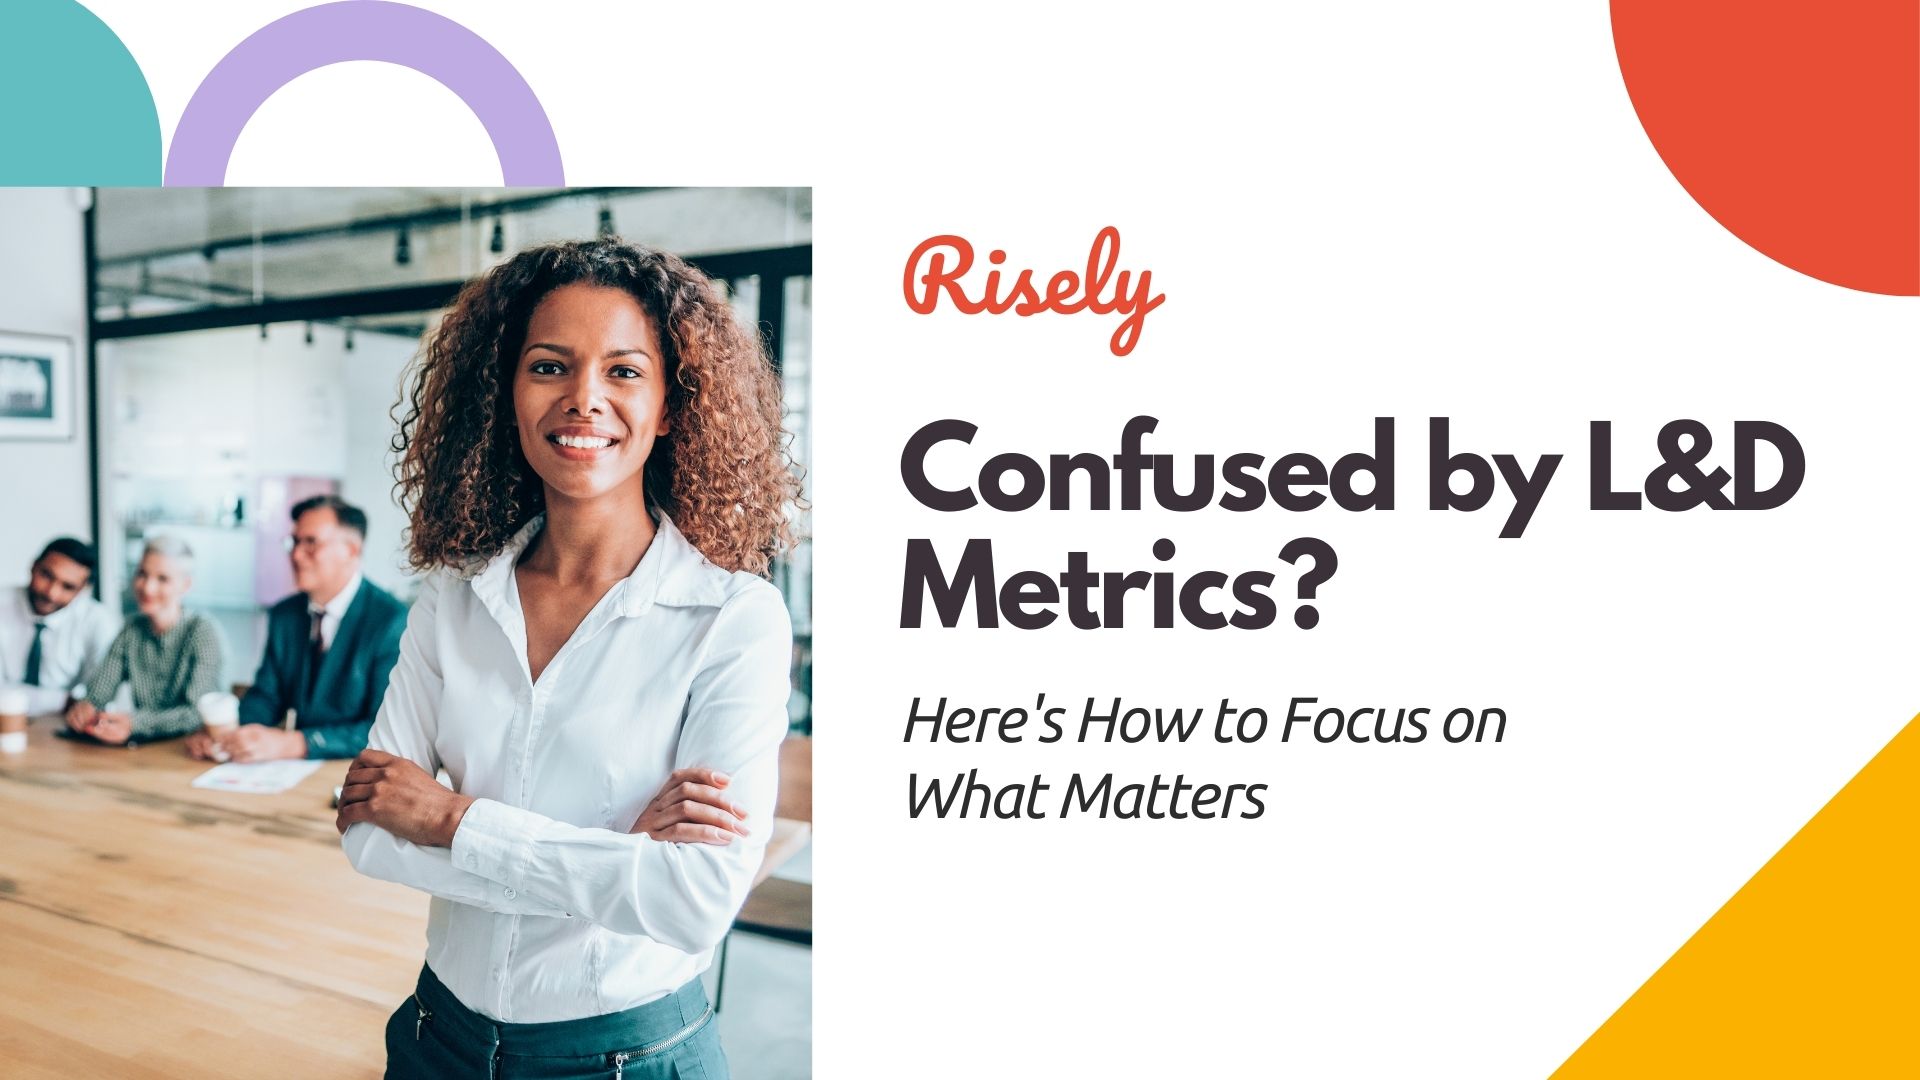 Confused by L&D Metrics? Here's How to Focus on What Matters